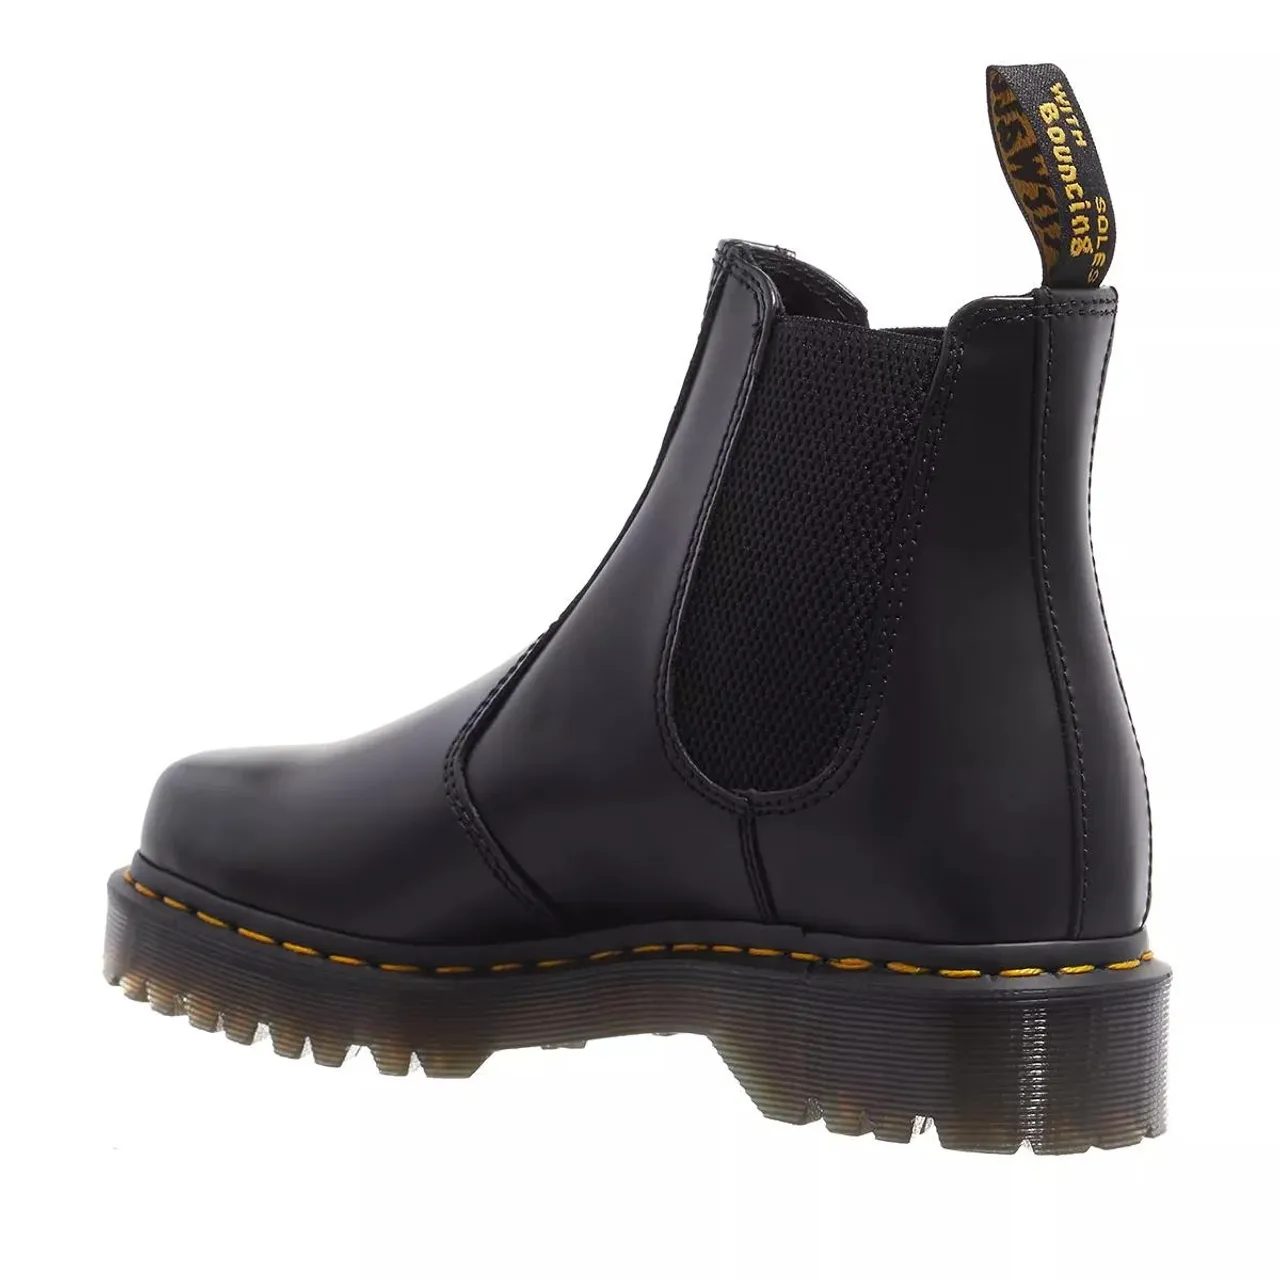 Dr. Martens Boots & Ankle Boots - 2976 Bex Squared - black - Boots & Ankle Boots for ladies